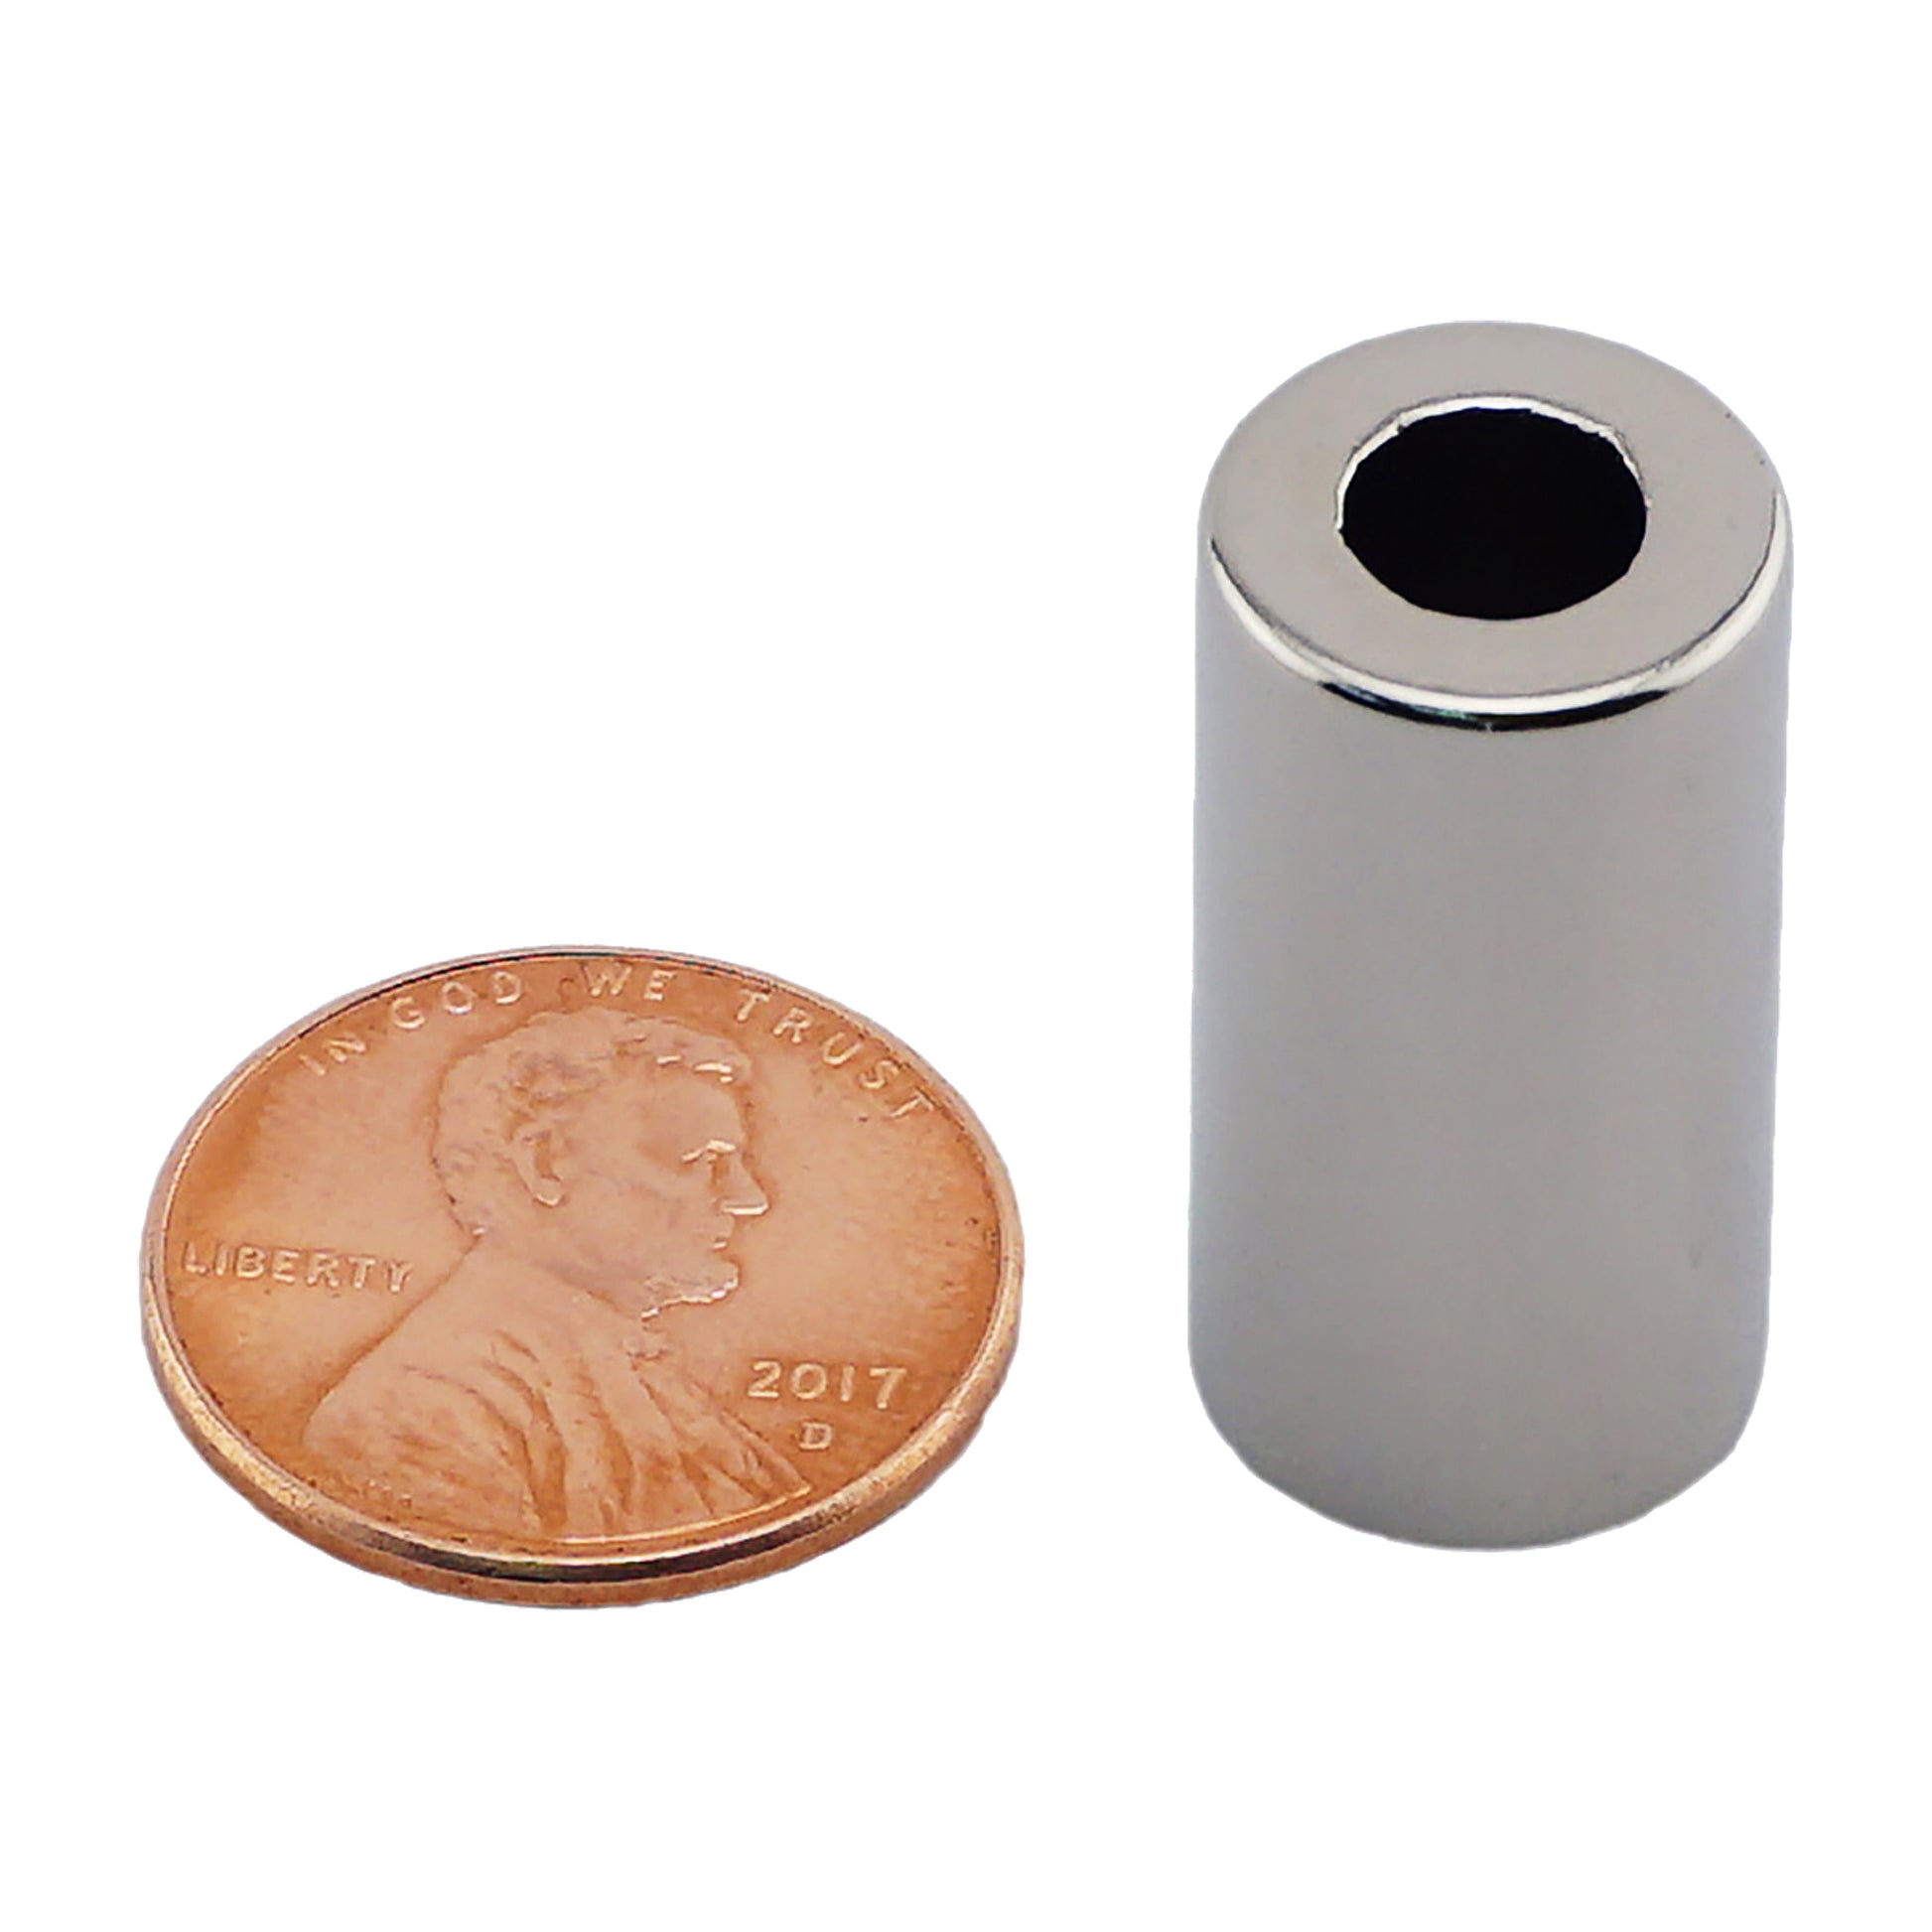 Load image into Gallery viewer, NR005021N Neodymium Ring Magnet - Compared to Penny for Size Reference